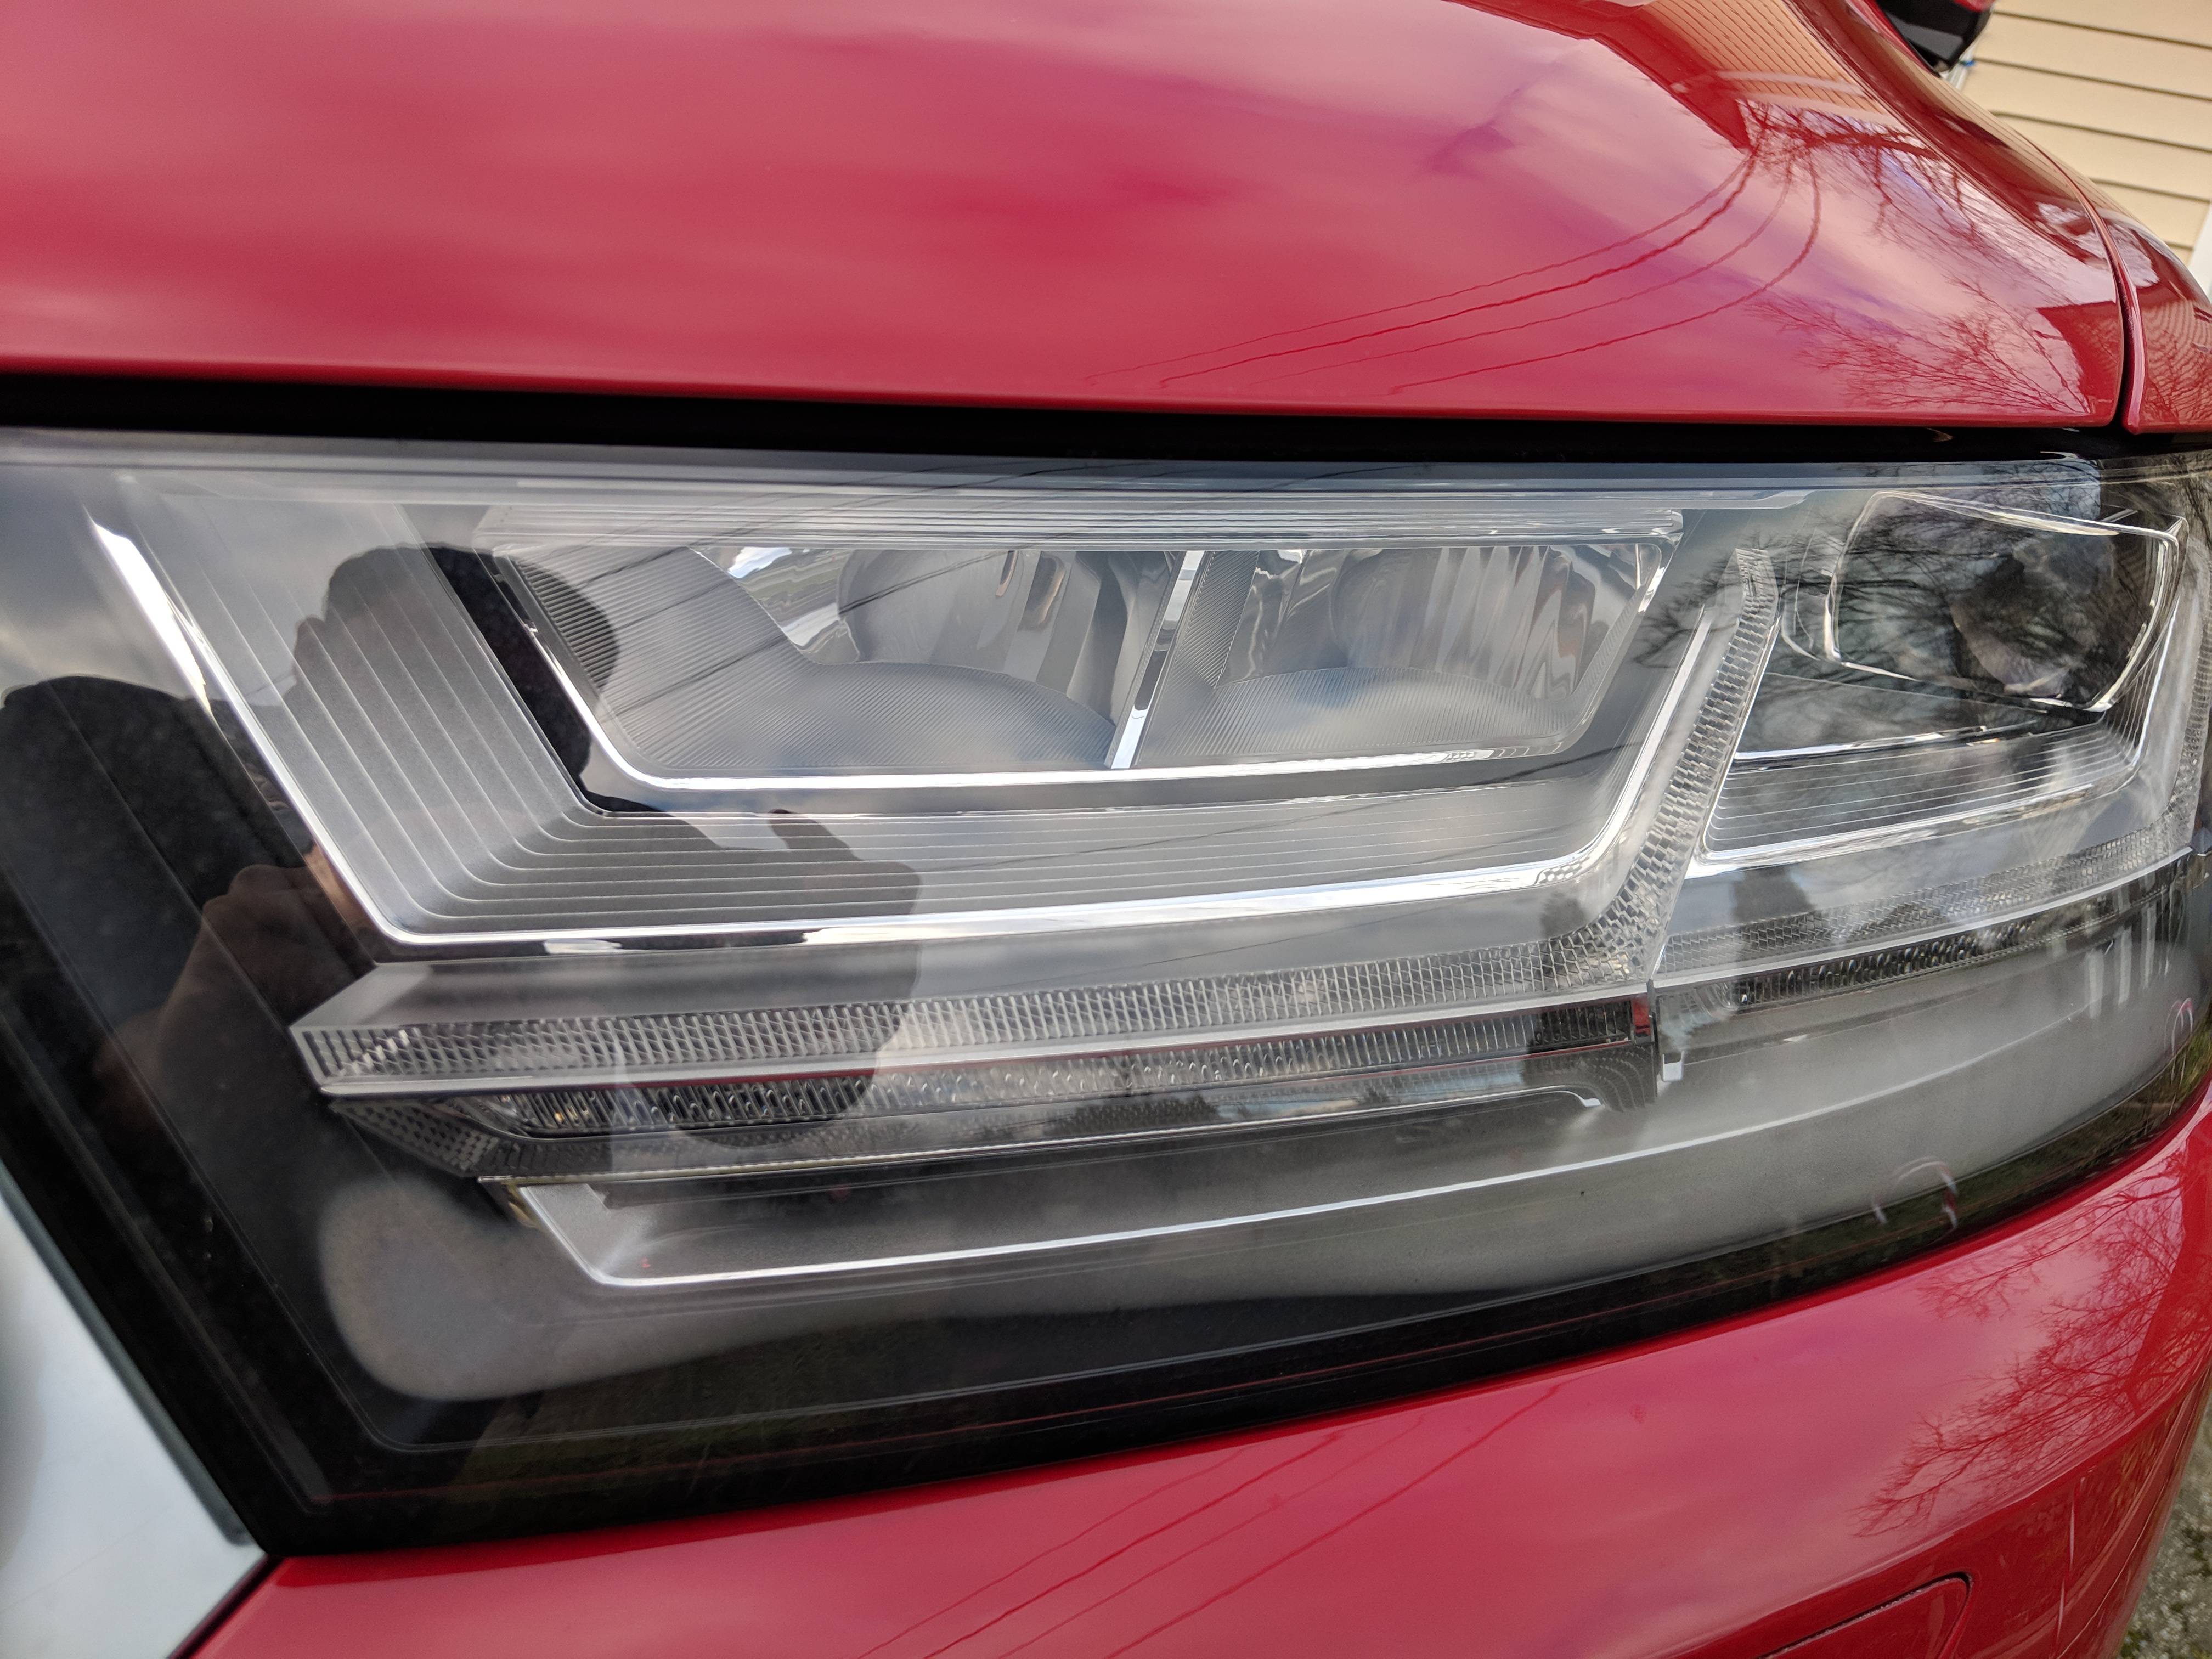 Headlamp Condensation issue with new car - AudiWorld